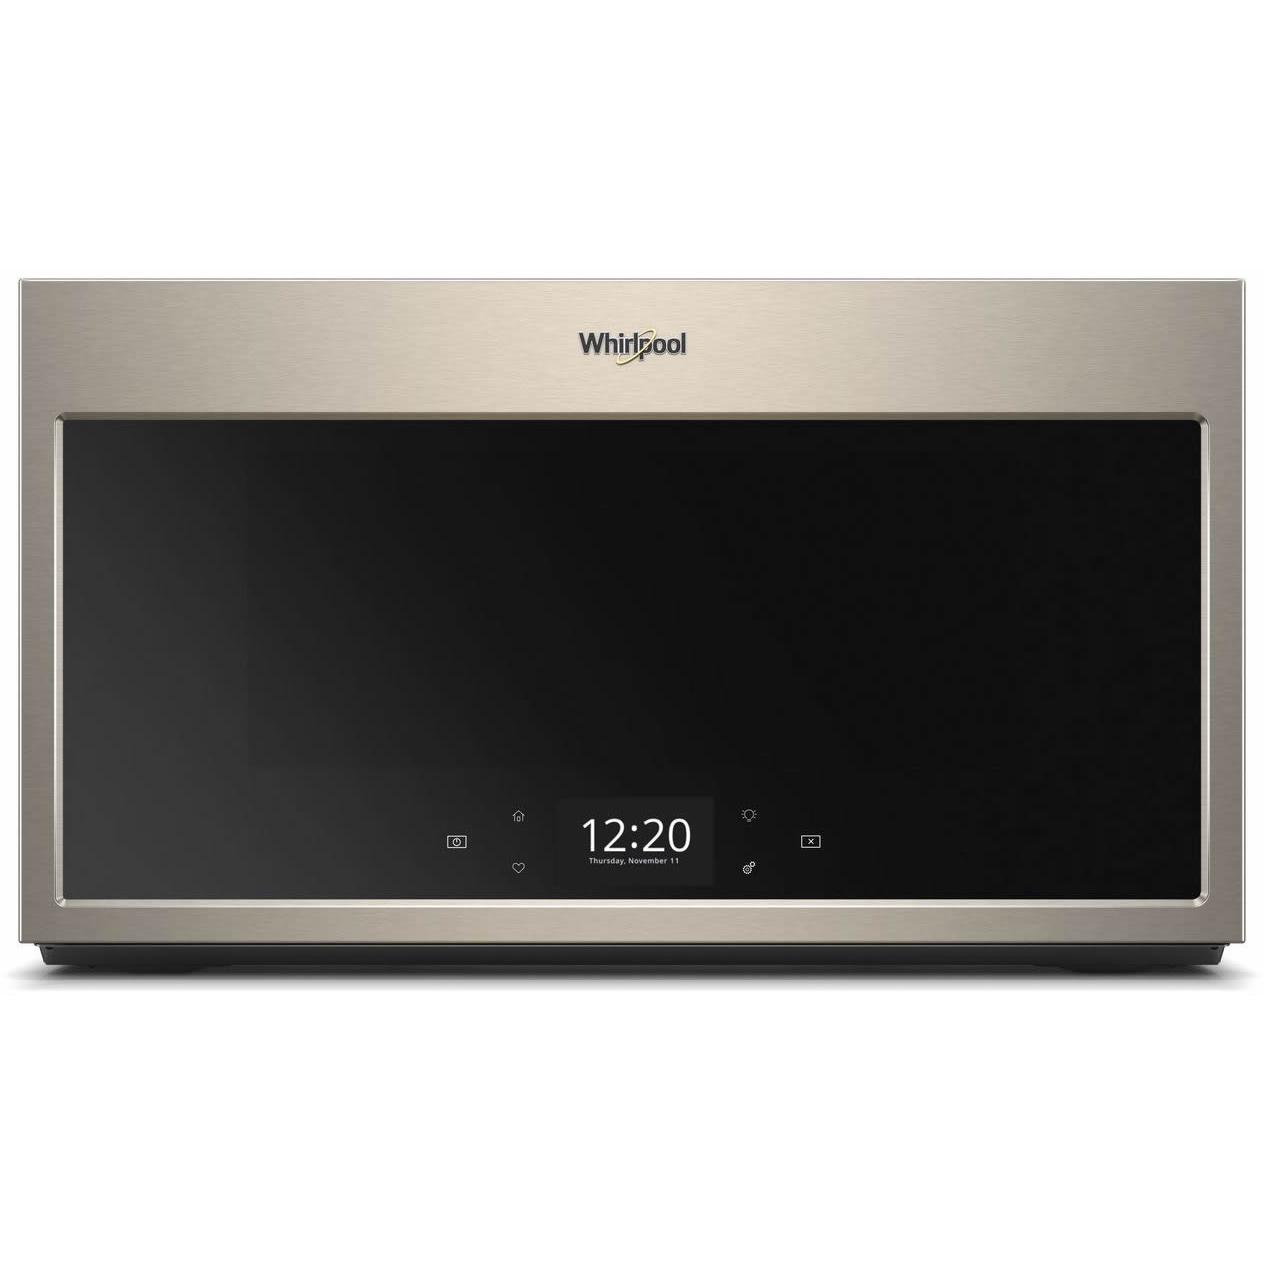 Whirlpool 30-inch, 1.9 cu. ft. Over-The-Range Microwave Oven WMHA9019HN